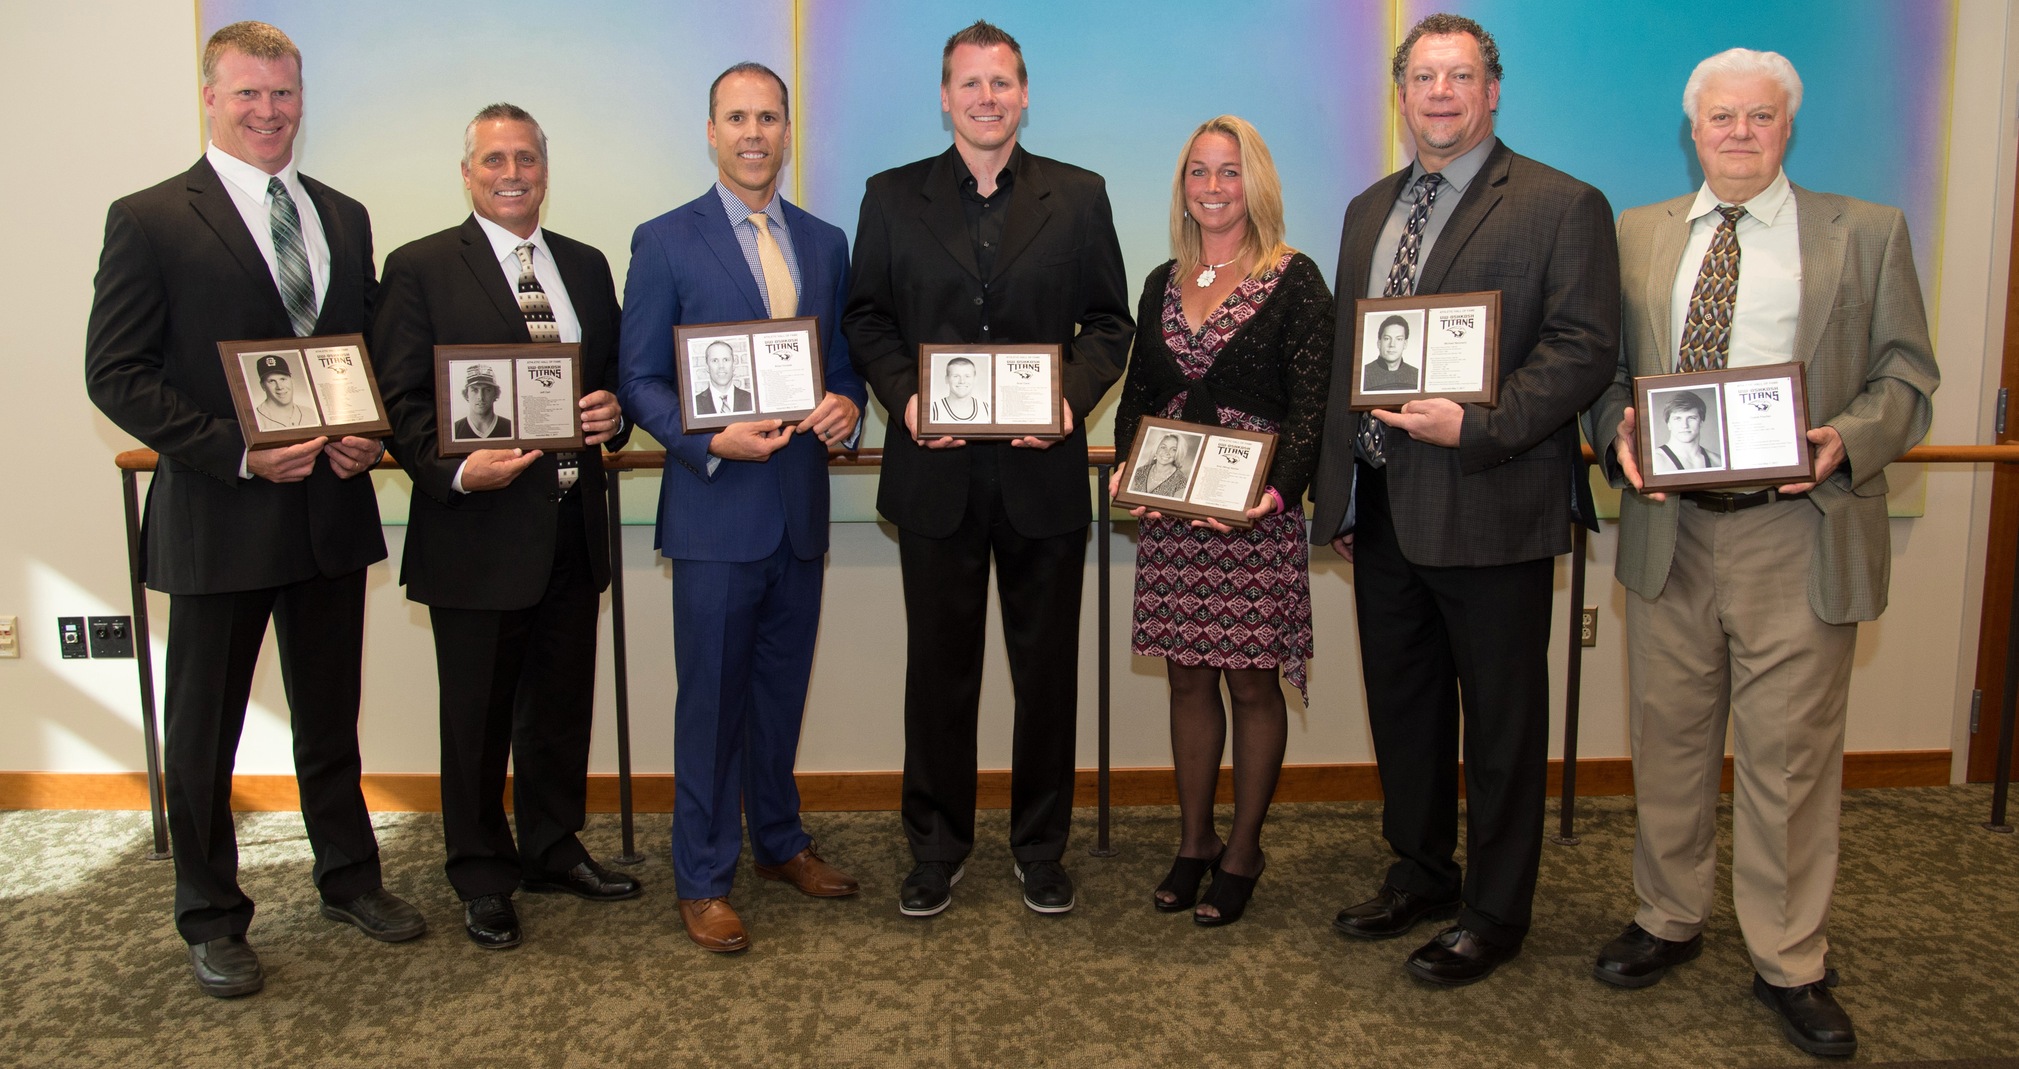 2017 UW-Oshkosh Hall of Fame Inductees (L-R): Craig Lieder, Jeff Carl, Brian Tomalak, Brad Clark, Amy (Wing) Barber, Michael Neumann and Duane Fischer (father LeRoy in photo).